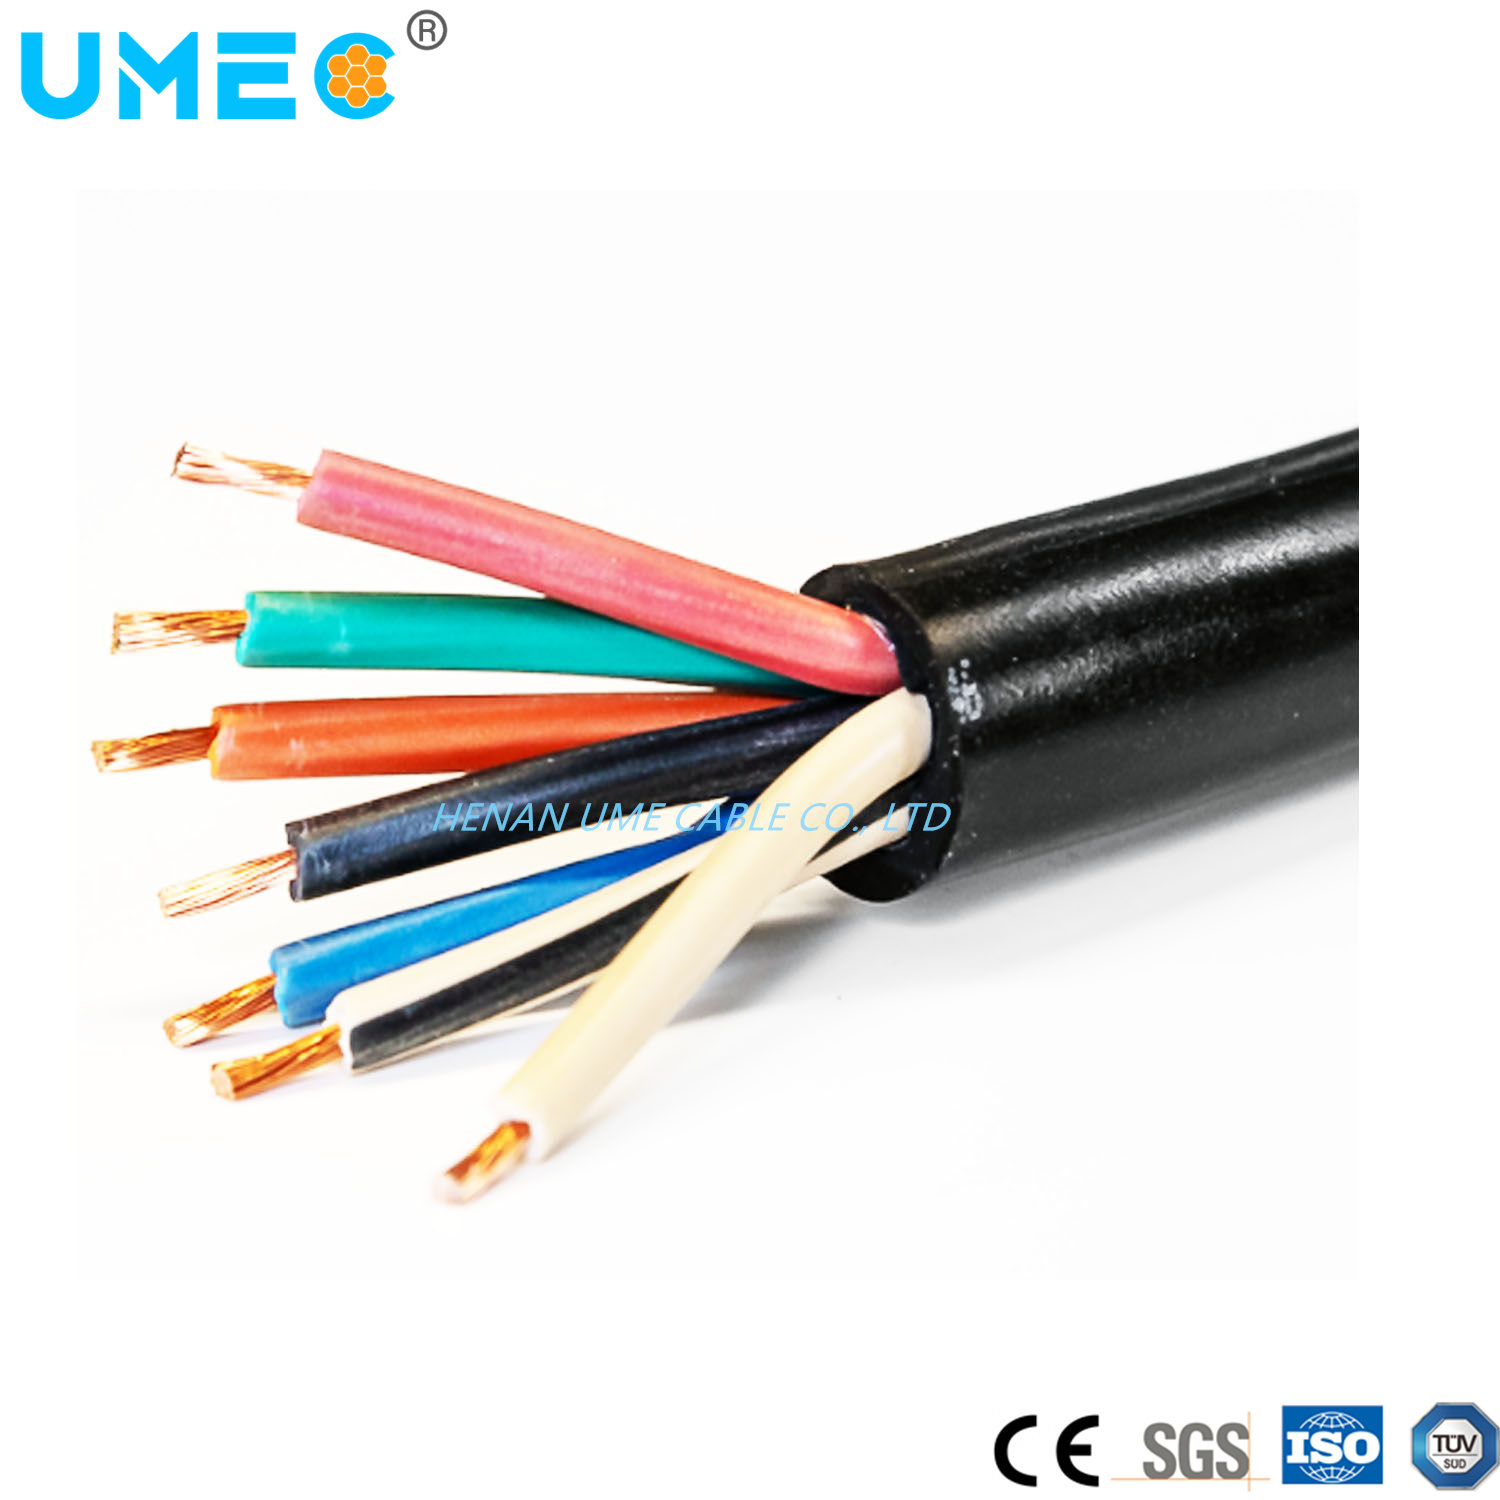 2022 OEM Support Factory Customized 2 3 4 6 8 10 12AWG 2 3 4 5 Core Flexible Sjoow Soow So Black Rubber Cable